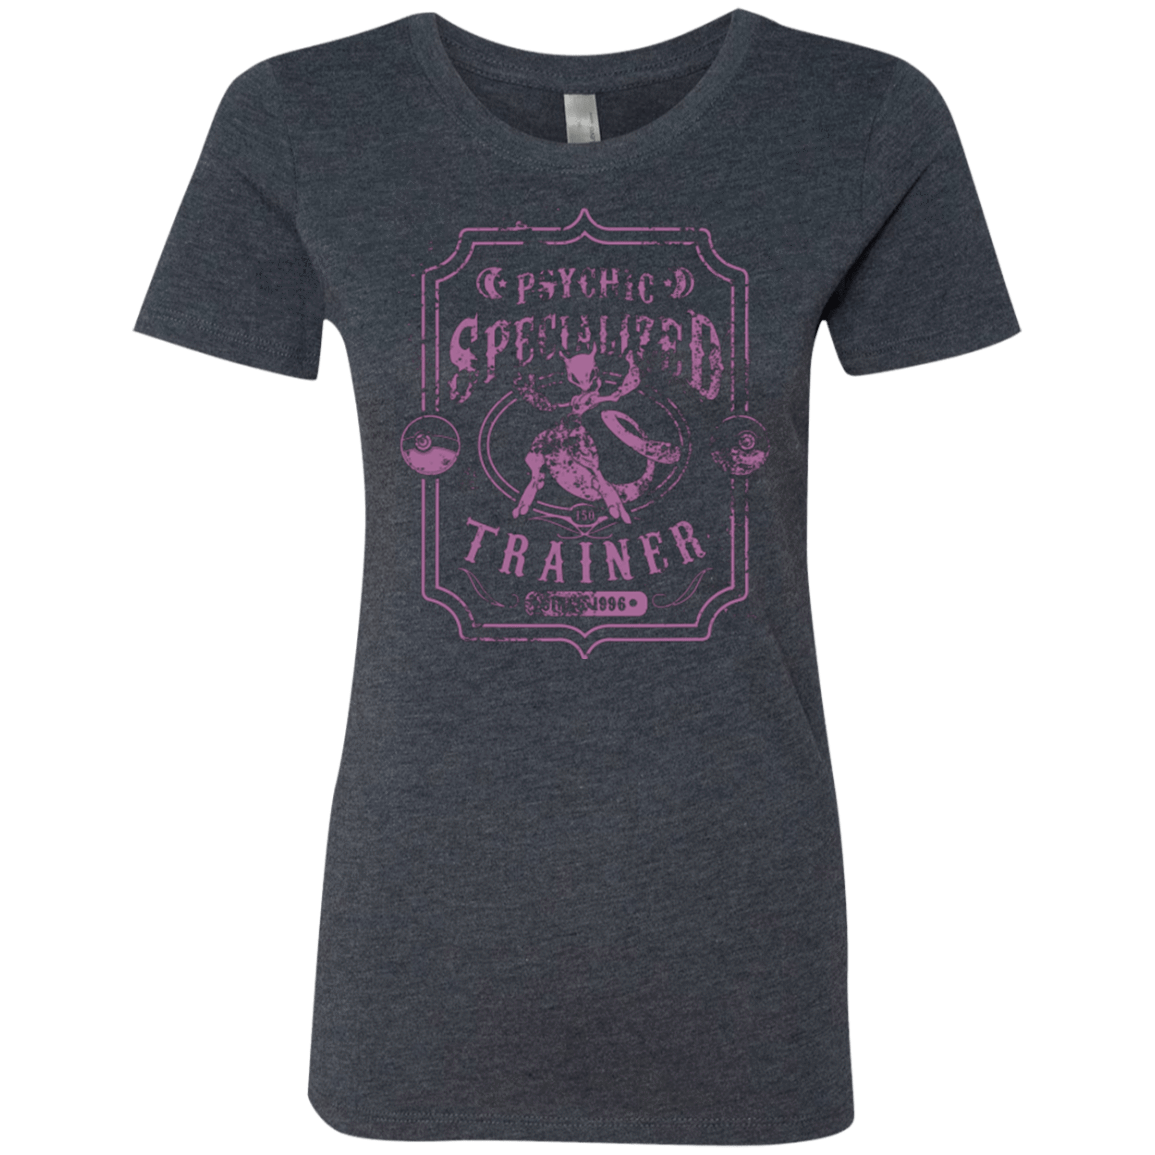 T-Shirts Vintage Navy / Small Psychic Specialized Trainer 2 Women's Triblend T-Shirt